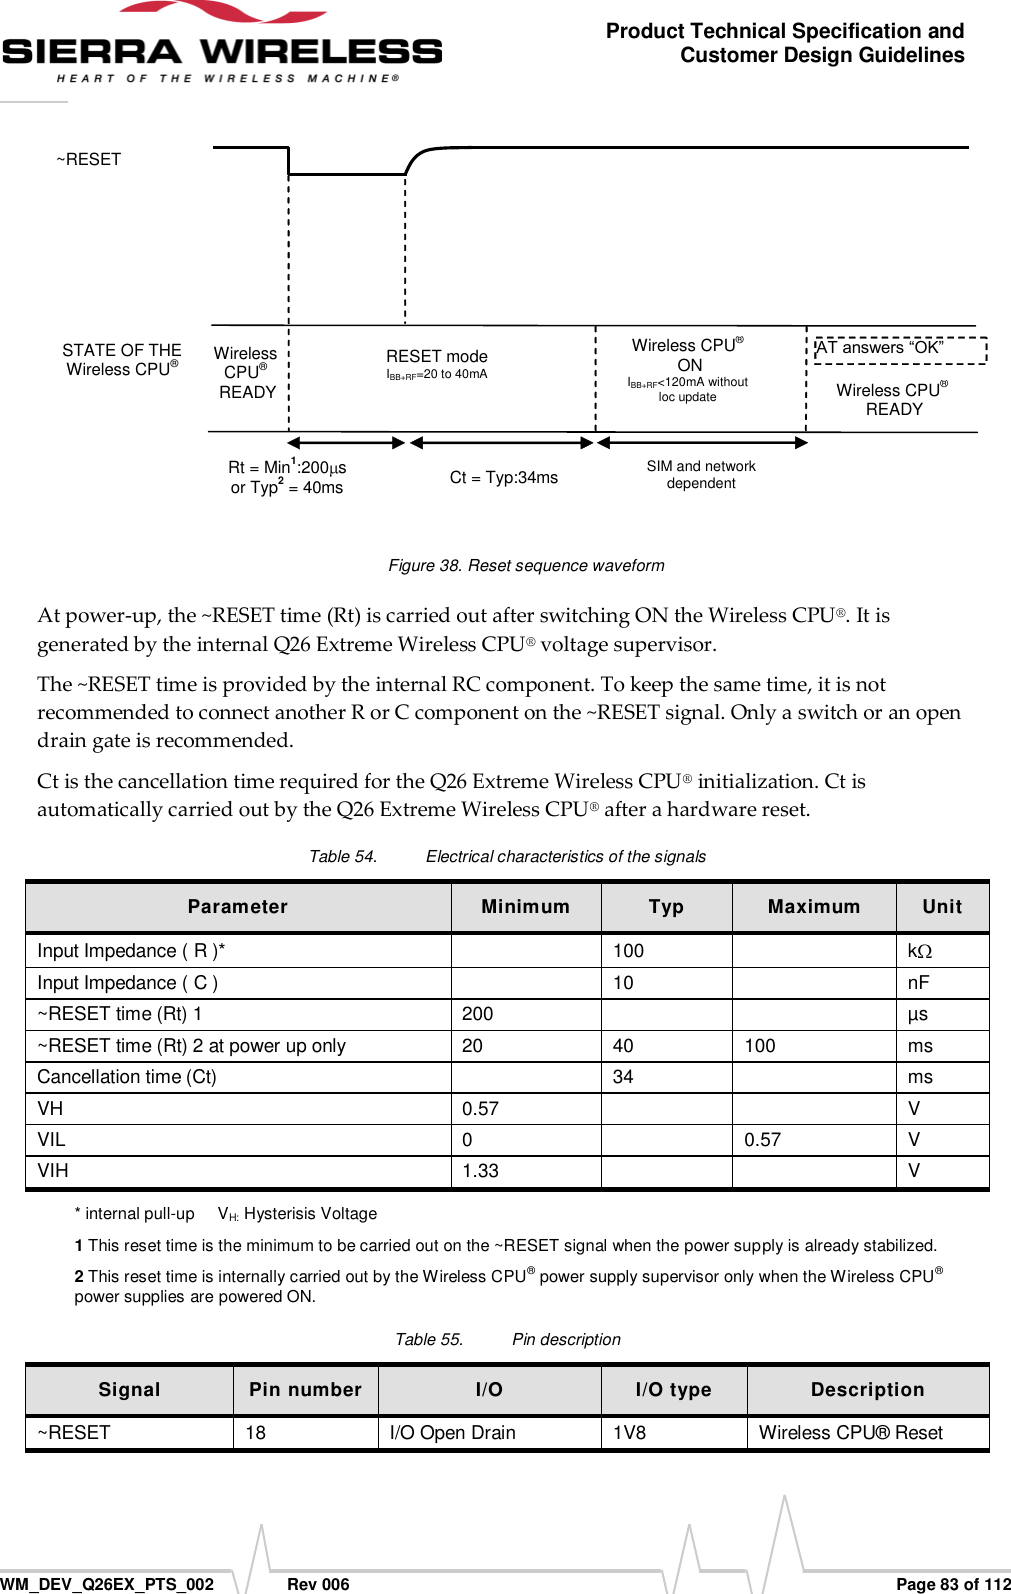      WM_DEV_Q26EX_PTS_002  Rev 006  Page 83 of 112 Product Technical Specification and Customer Design Guidelines  RESET mode IBB+RF=20 to 40mA ~RESET STATE OF THE  Wireless CPU® Wireless CPU®  READY Rt = Min1:200 s  or Typ2 = 40ms  AT answers “OK” Wireless CPU®  READY SIM and network dependent Wireless CPU®  ON IBB+RF&lt;120mA without loc update Ct = Typ:34ms  Figure 38. Reset sequence waveform At power-up, the ~RESET time (Rt) is carried out after switching ON the Wireless CPU®. It is generated by the internal Q26 Extreme Wireless CPU® voltage supervisor. The ~RESET time is provided by the internal RC component. To keep the same time, it is not recommended to connect another R or C component on the ~RESET signal. Only a switch or an open drain gate is recommended. Ct is the cancellation time required for the Q26 Extreme Wireless CPU® initialization. Ct is automatically carried out by the Q26 Extreme Wireless CPU® after a hardware reset. Table 54.  Electrical characteristics of the signals Parameter Minimum Typ Maximum Unit Input Impedance ( R )*  100  k  Input Impedance ( C )  10  nF ~RESET time (Rt) 1 200   µs ~RESET time (Rt) 2 at power up only 20 40 100 ms Cancellation time (Ct)  34  ms VH 0.57   V VIL 0  0.57 V VIH 1.33   V * internal pull-up     VH: Hysterisis Voltage 1 This reset time is the minimum to be carried out on the ~RESET signal when the power supply is already stabilized. 2 This reset time is internally carried out by the Wireless CPU® power supply supervisor only when the Wireless CPU® power supplies are powered ON. Table 55.  Pin description Signal Pin number I/O I/O type Description ~RESET 18 I/O Open Drain 1V8 Wireless CPU® Reset  